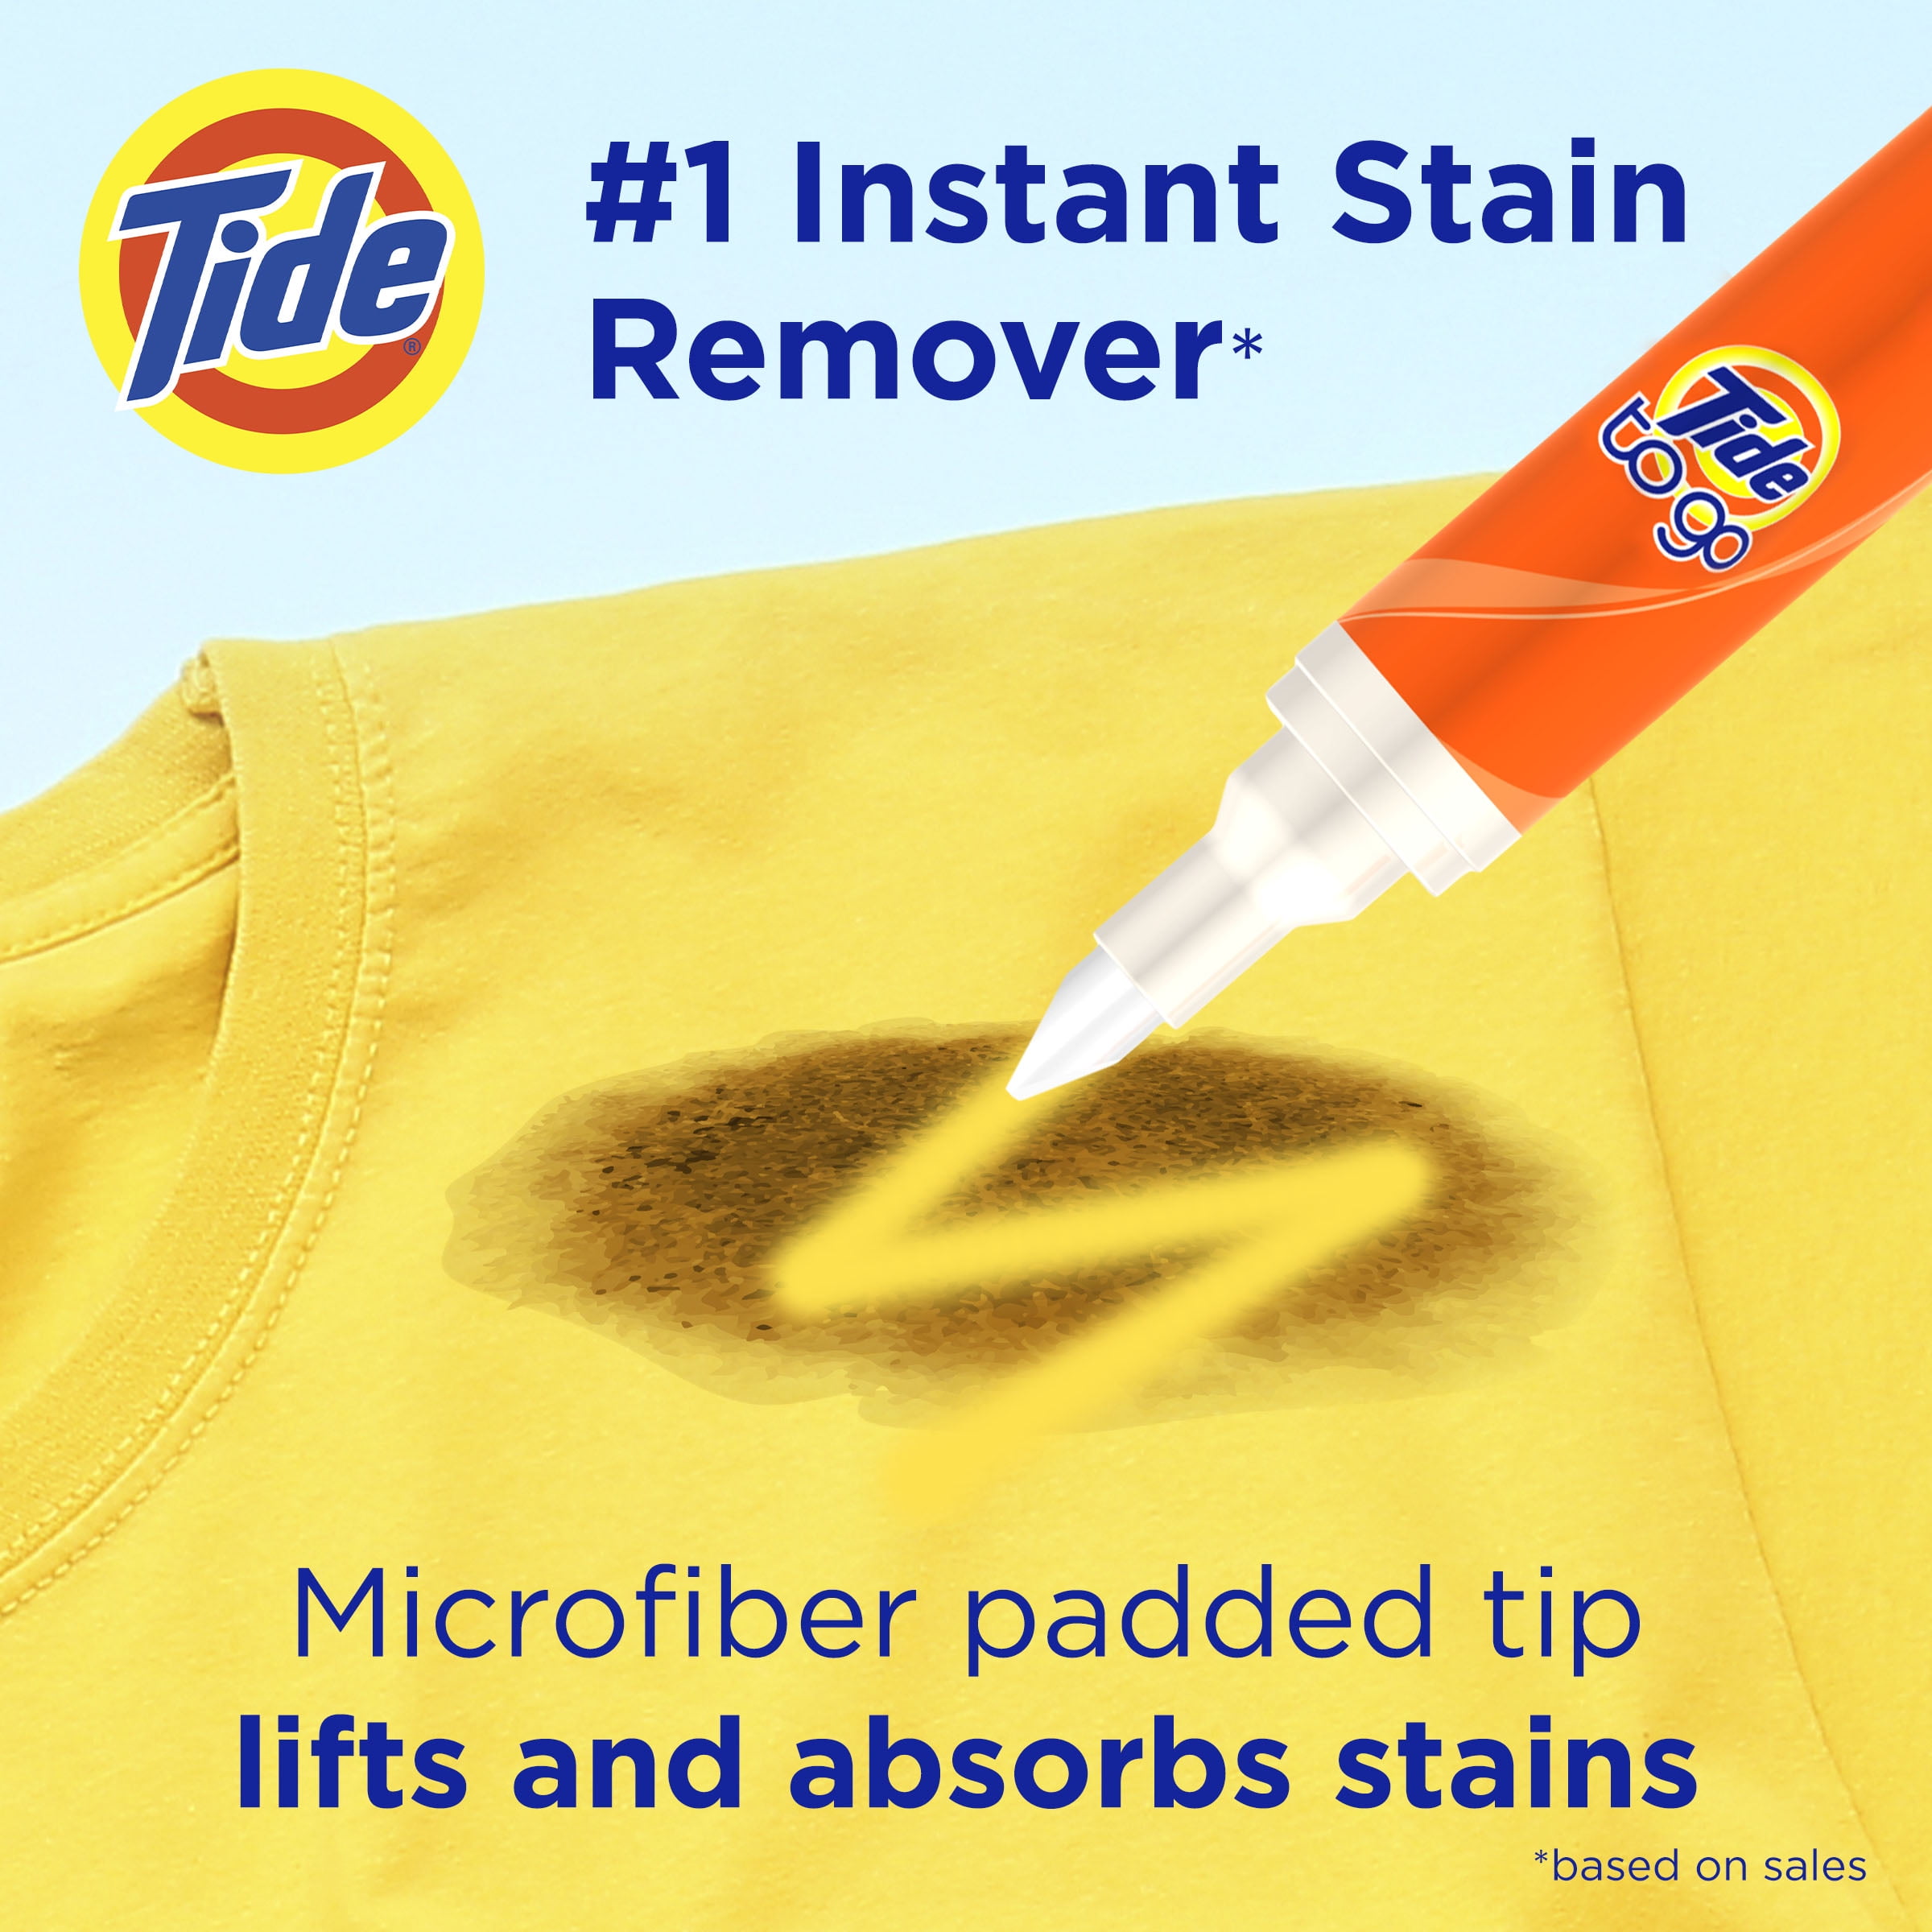 Tide To Go Instant Stain Remover Pen Liquid No Bleach Clean Laundry 10ml,  4-Pack 